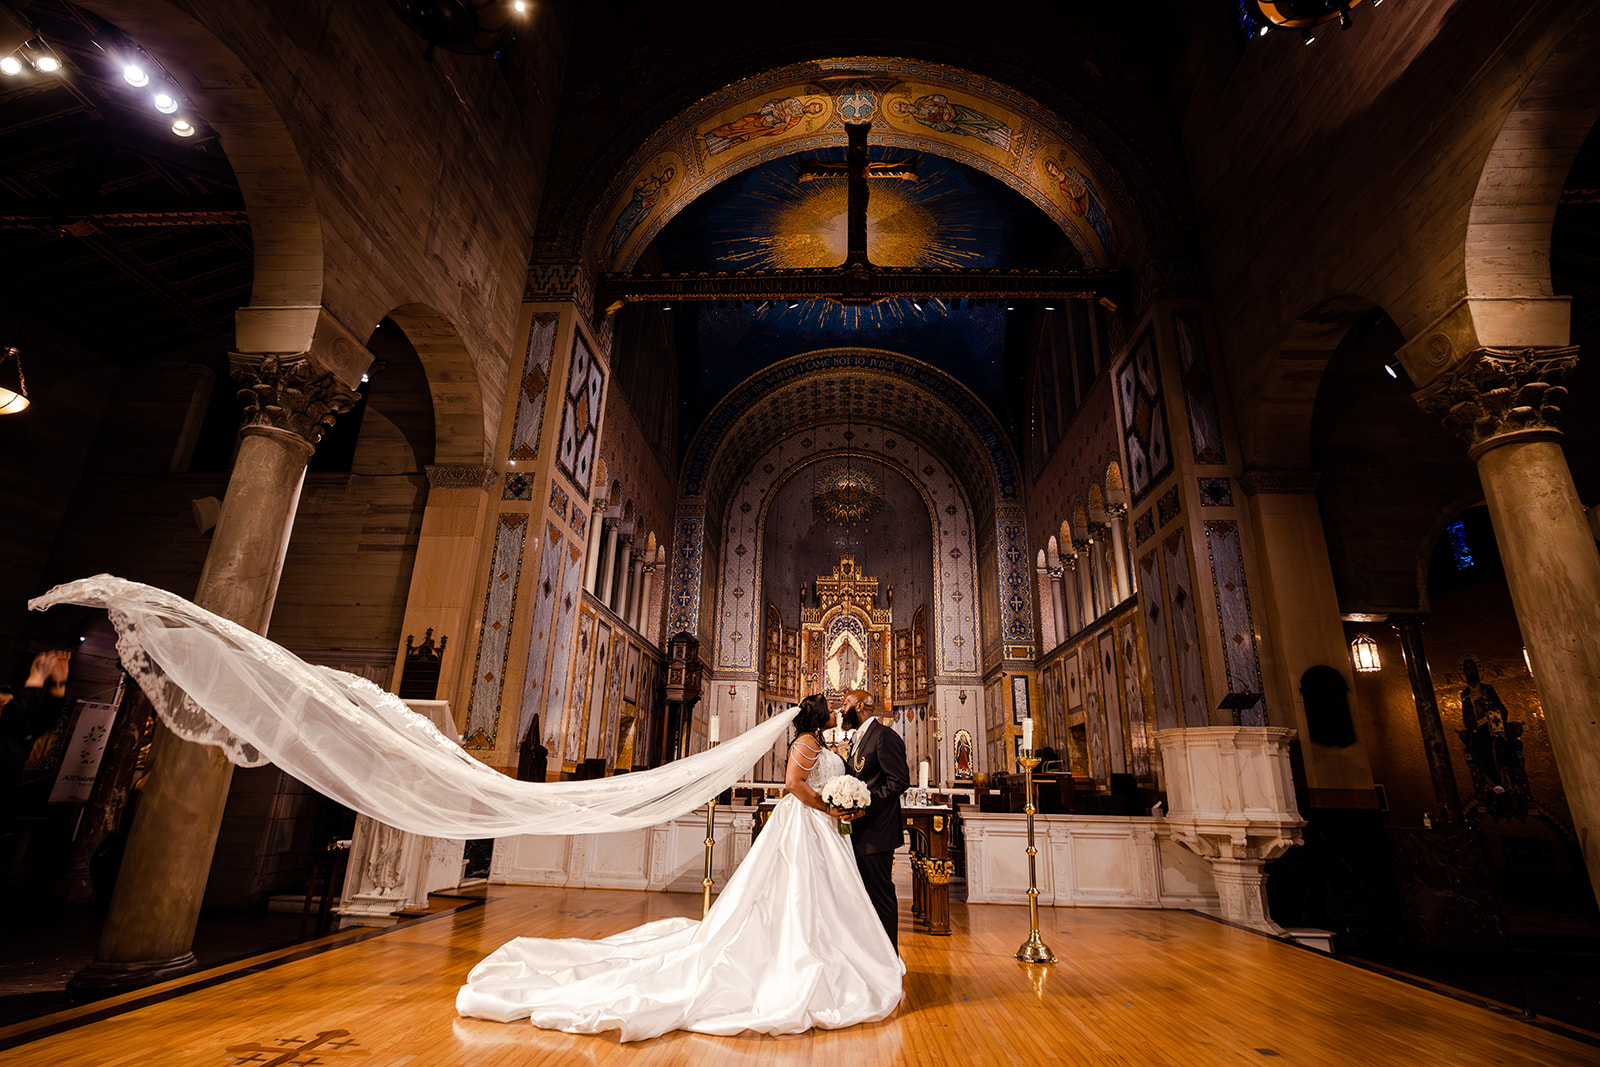 ThomasKim_photography Los Angeles Wedding Photographer capturing a bride and groom with their veil blowing in a church.